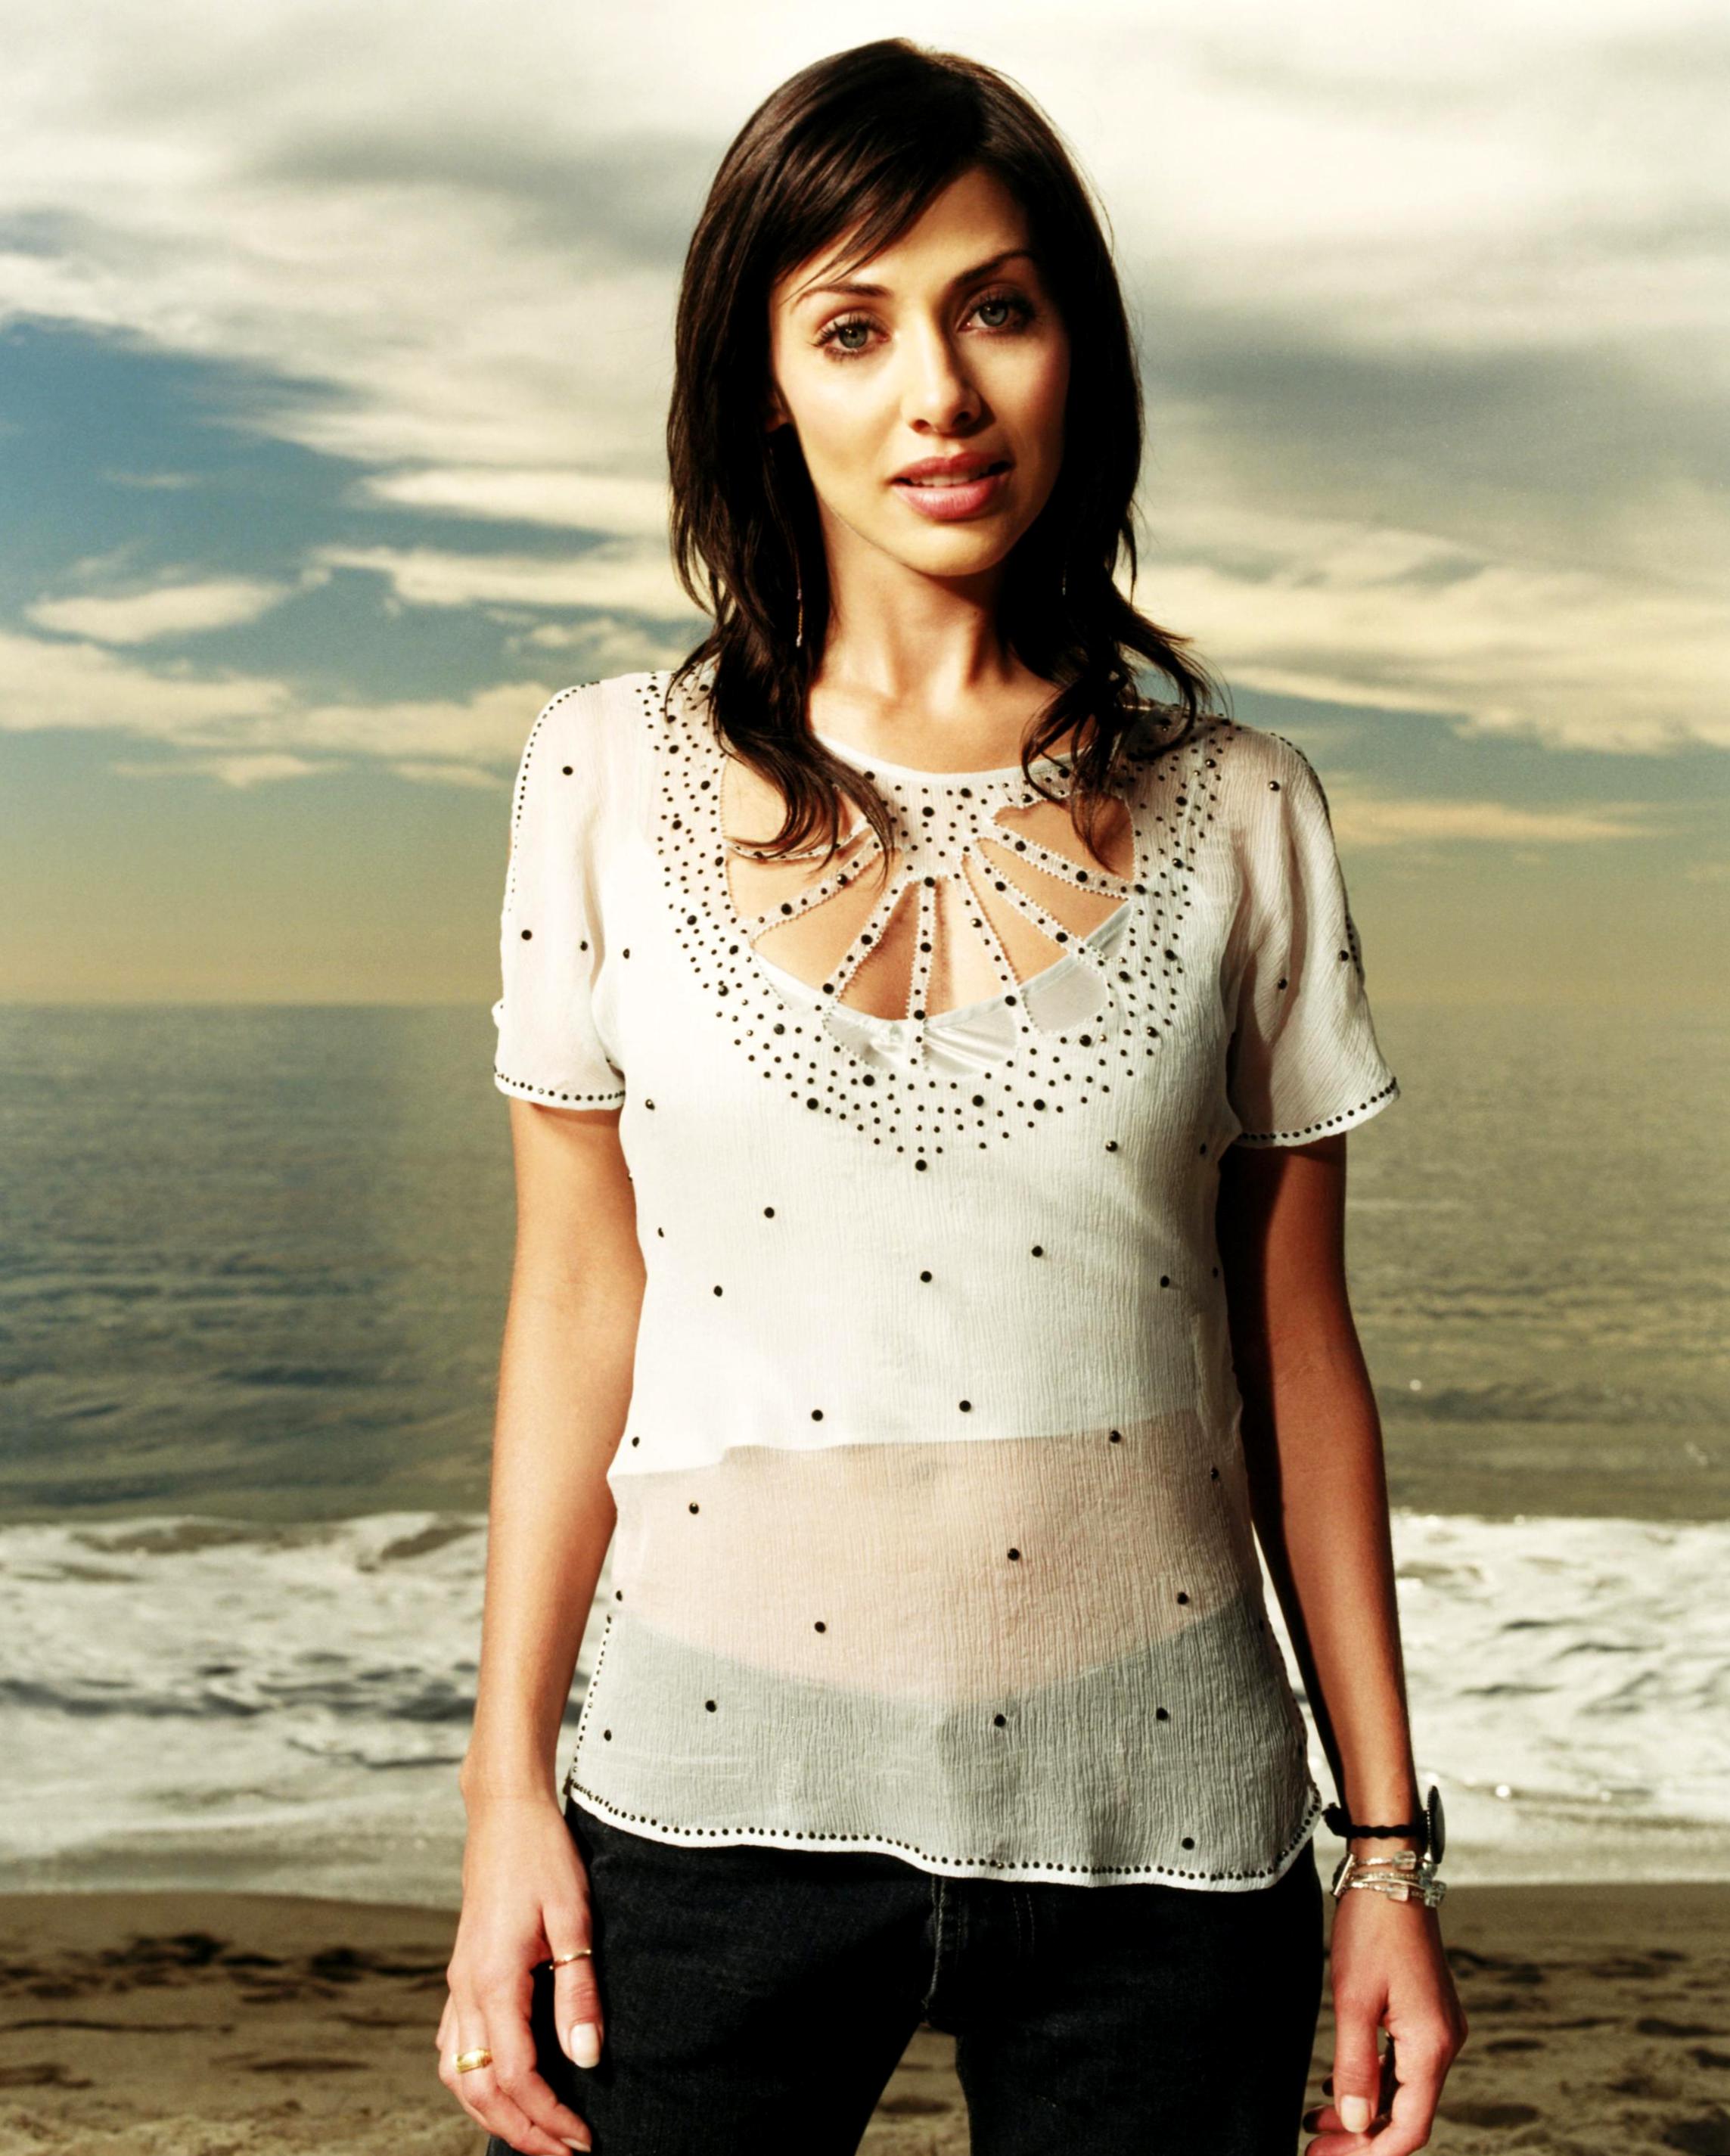 65+ Hot Pictures Of Natalie Imbruglia Will Get You Hot Under Your Collars | Best Of Comic Books